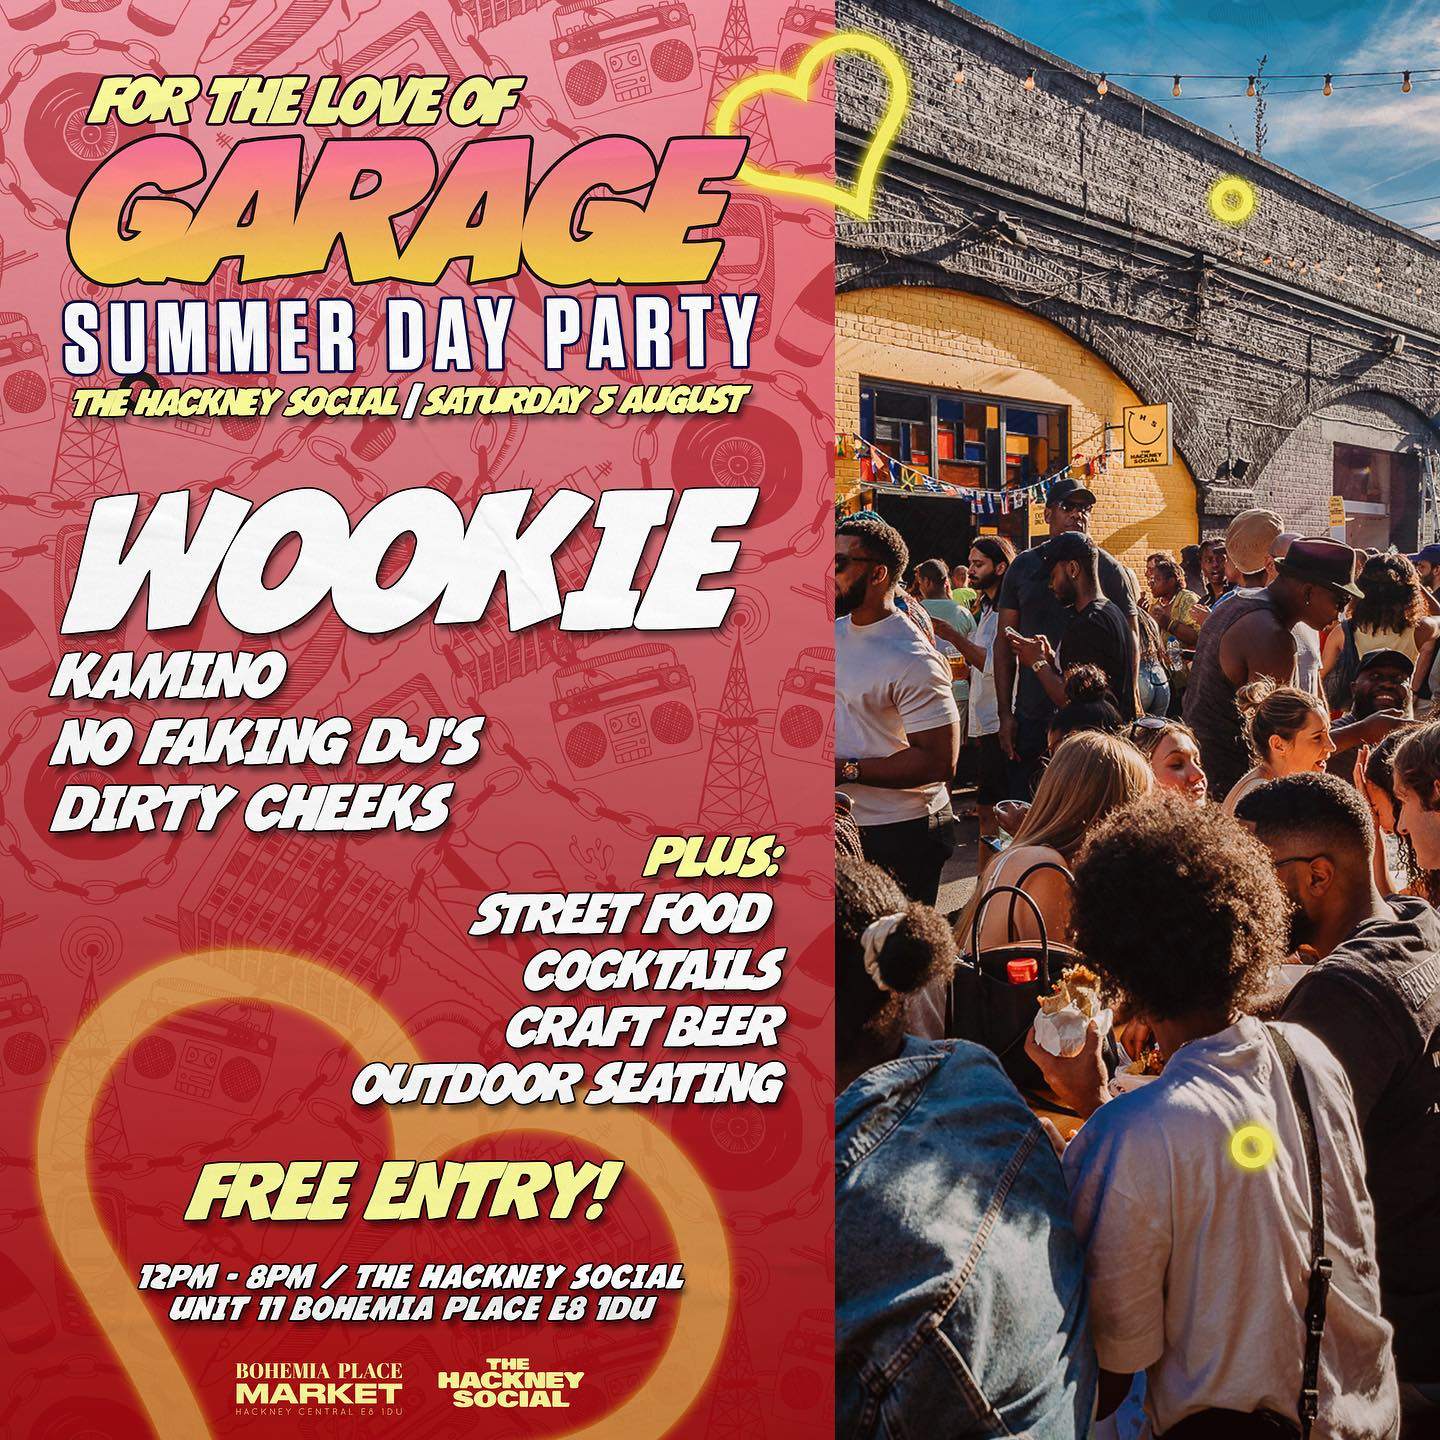 Hackney Street Market x For The Love of Garage with Wookie - フライヤー表